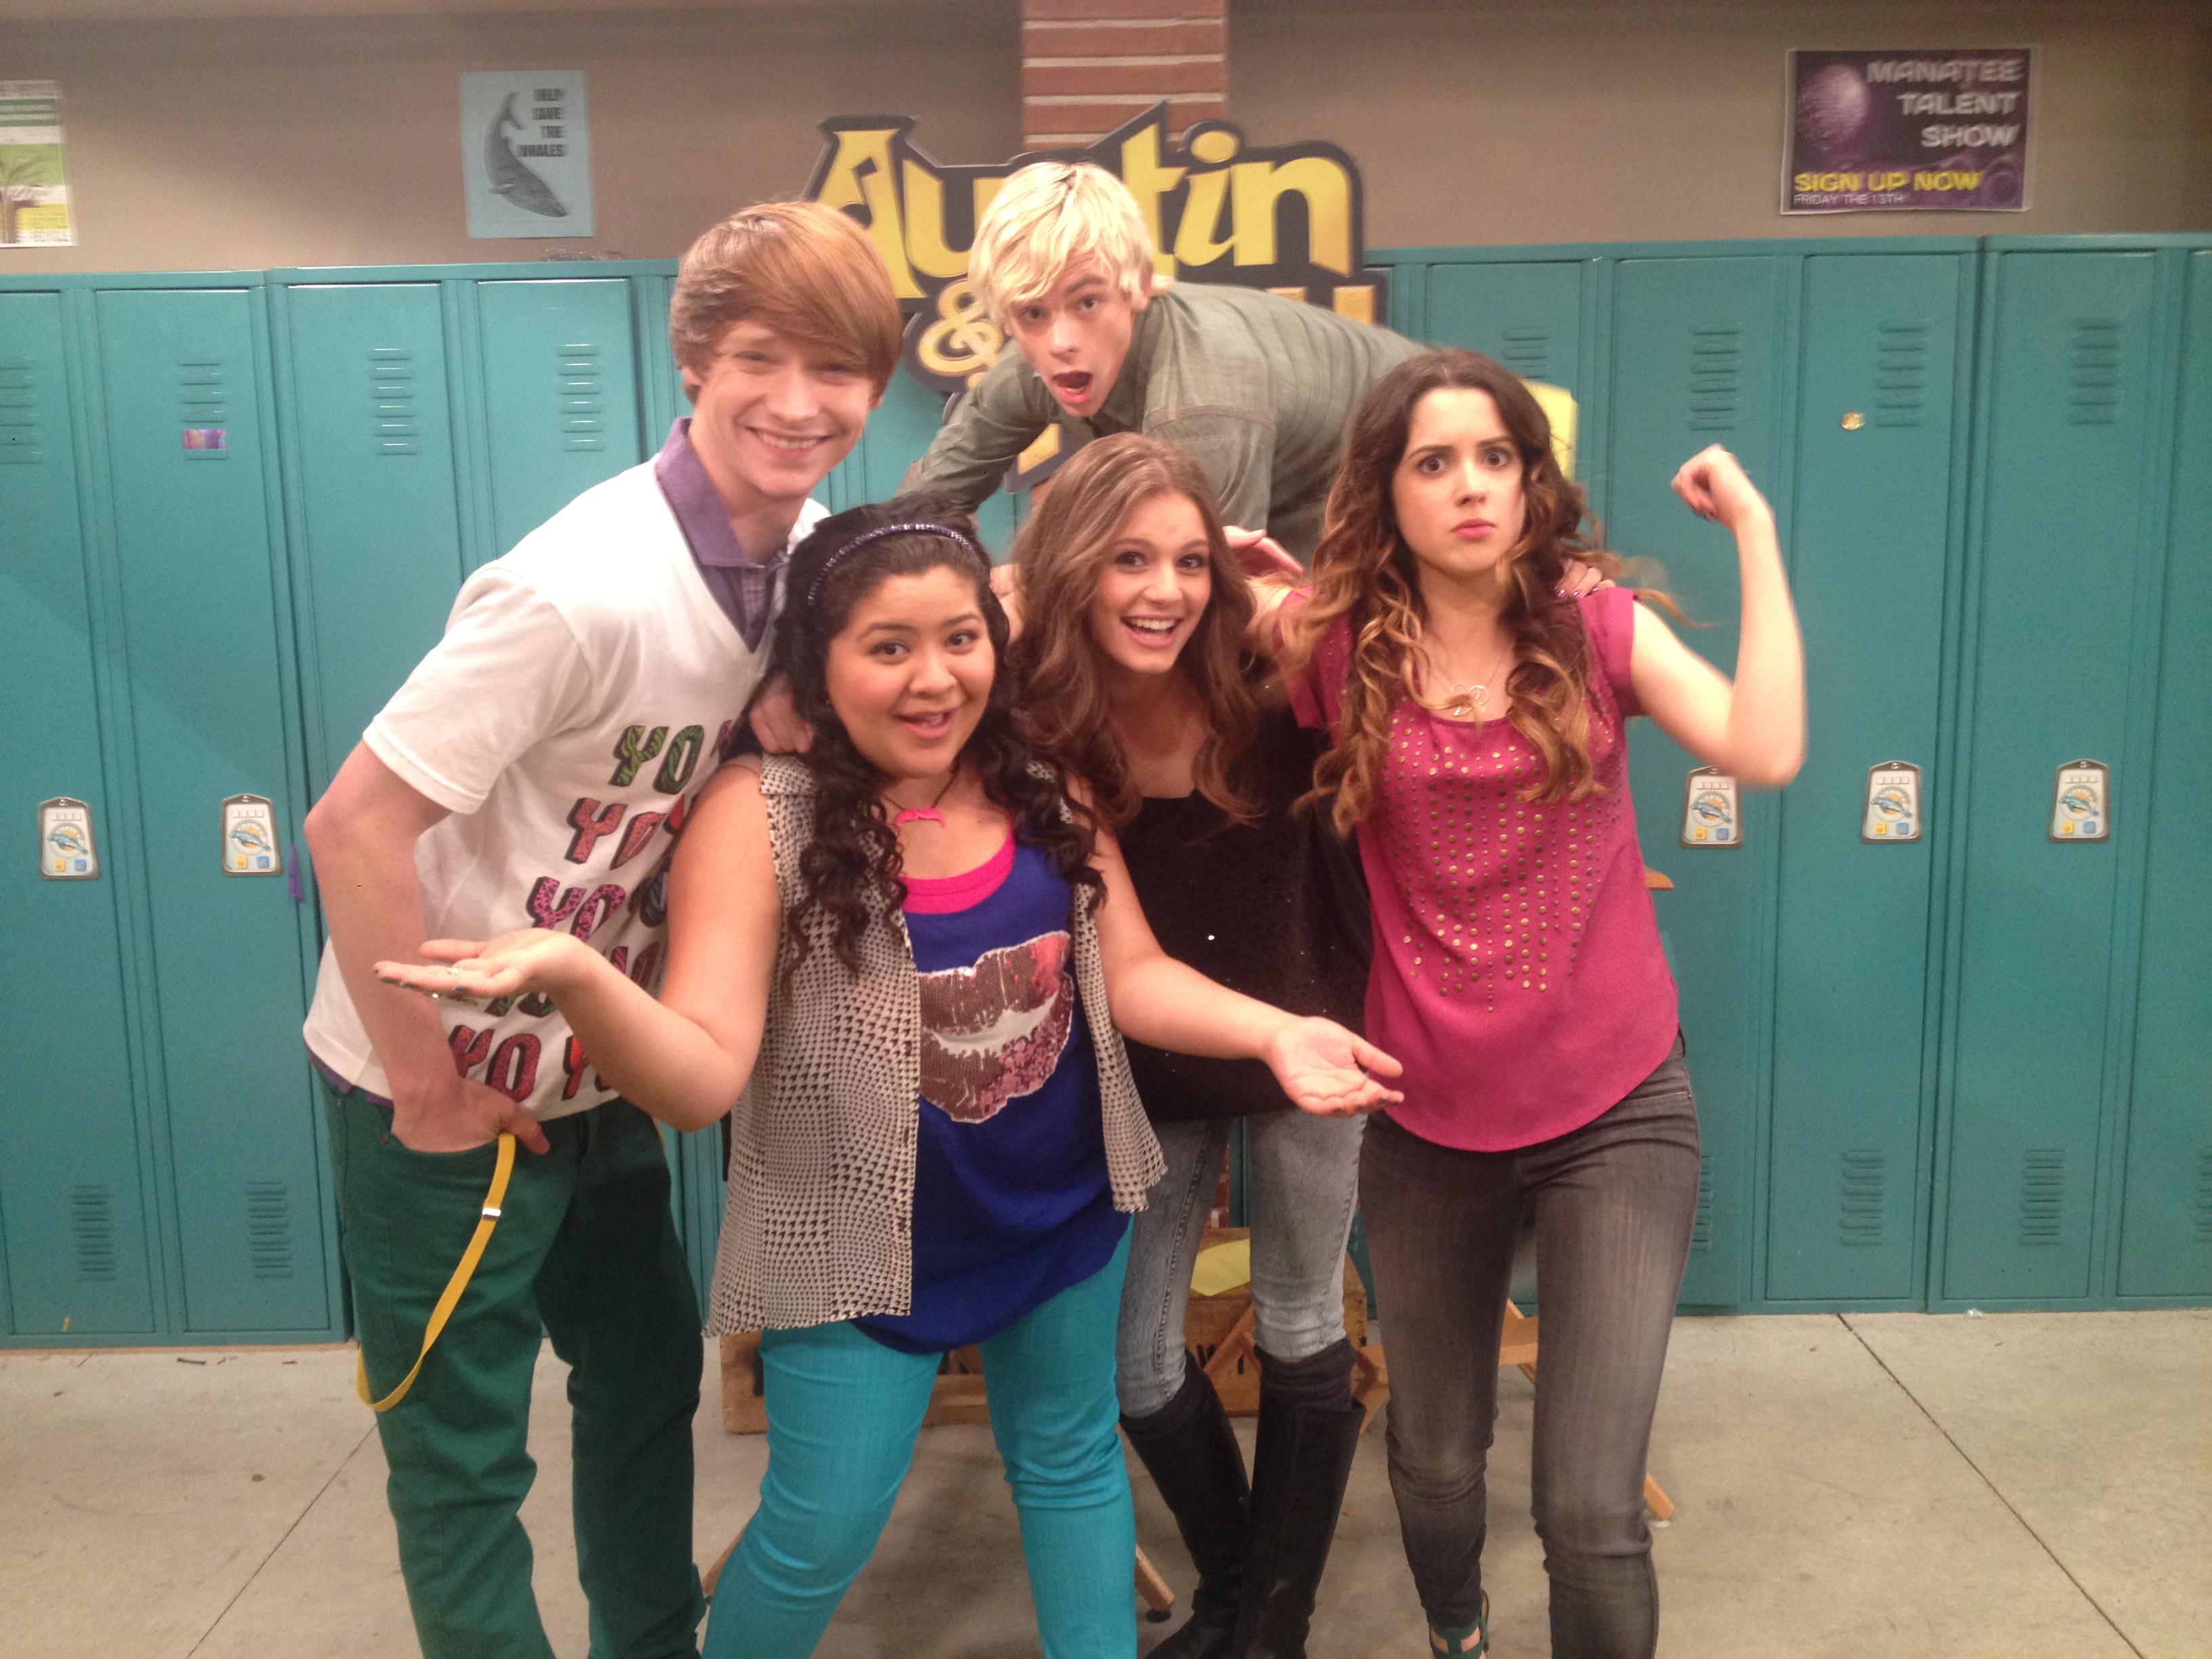 Carrie Wampler in Austin & Ally